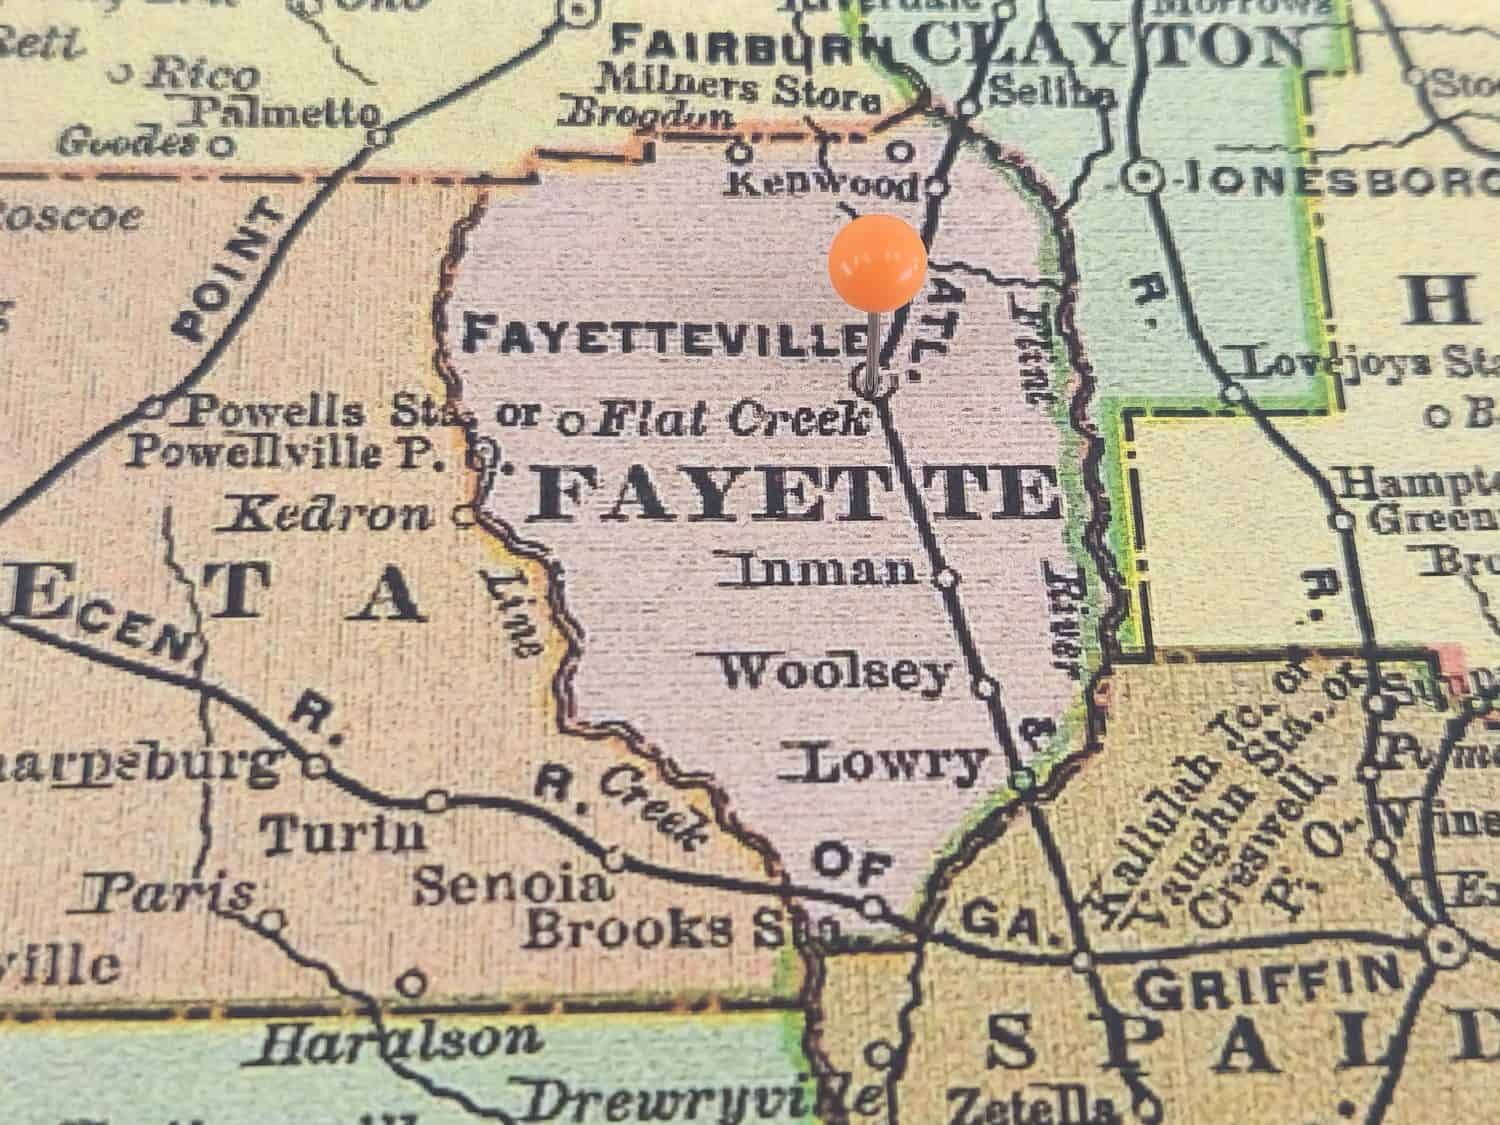 Fayette County, Georgia marked by an orange tack on a colorful vintage map. The county seat is located in the city of Fayetteville, GA.